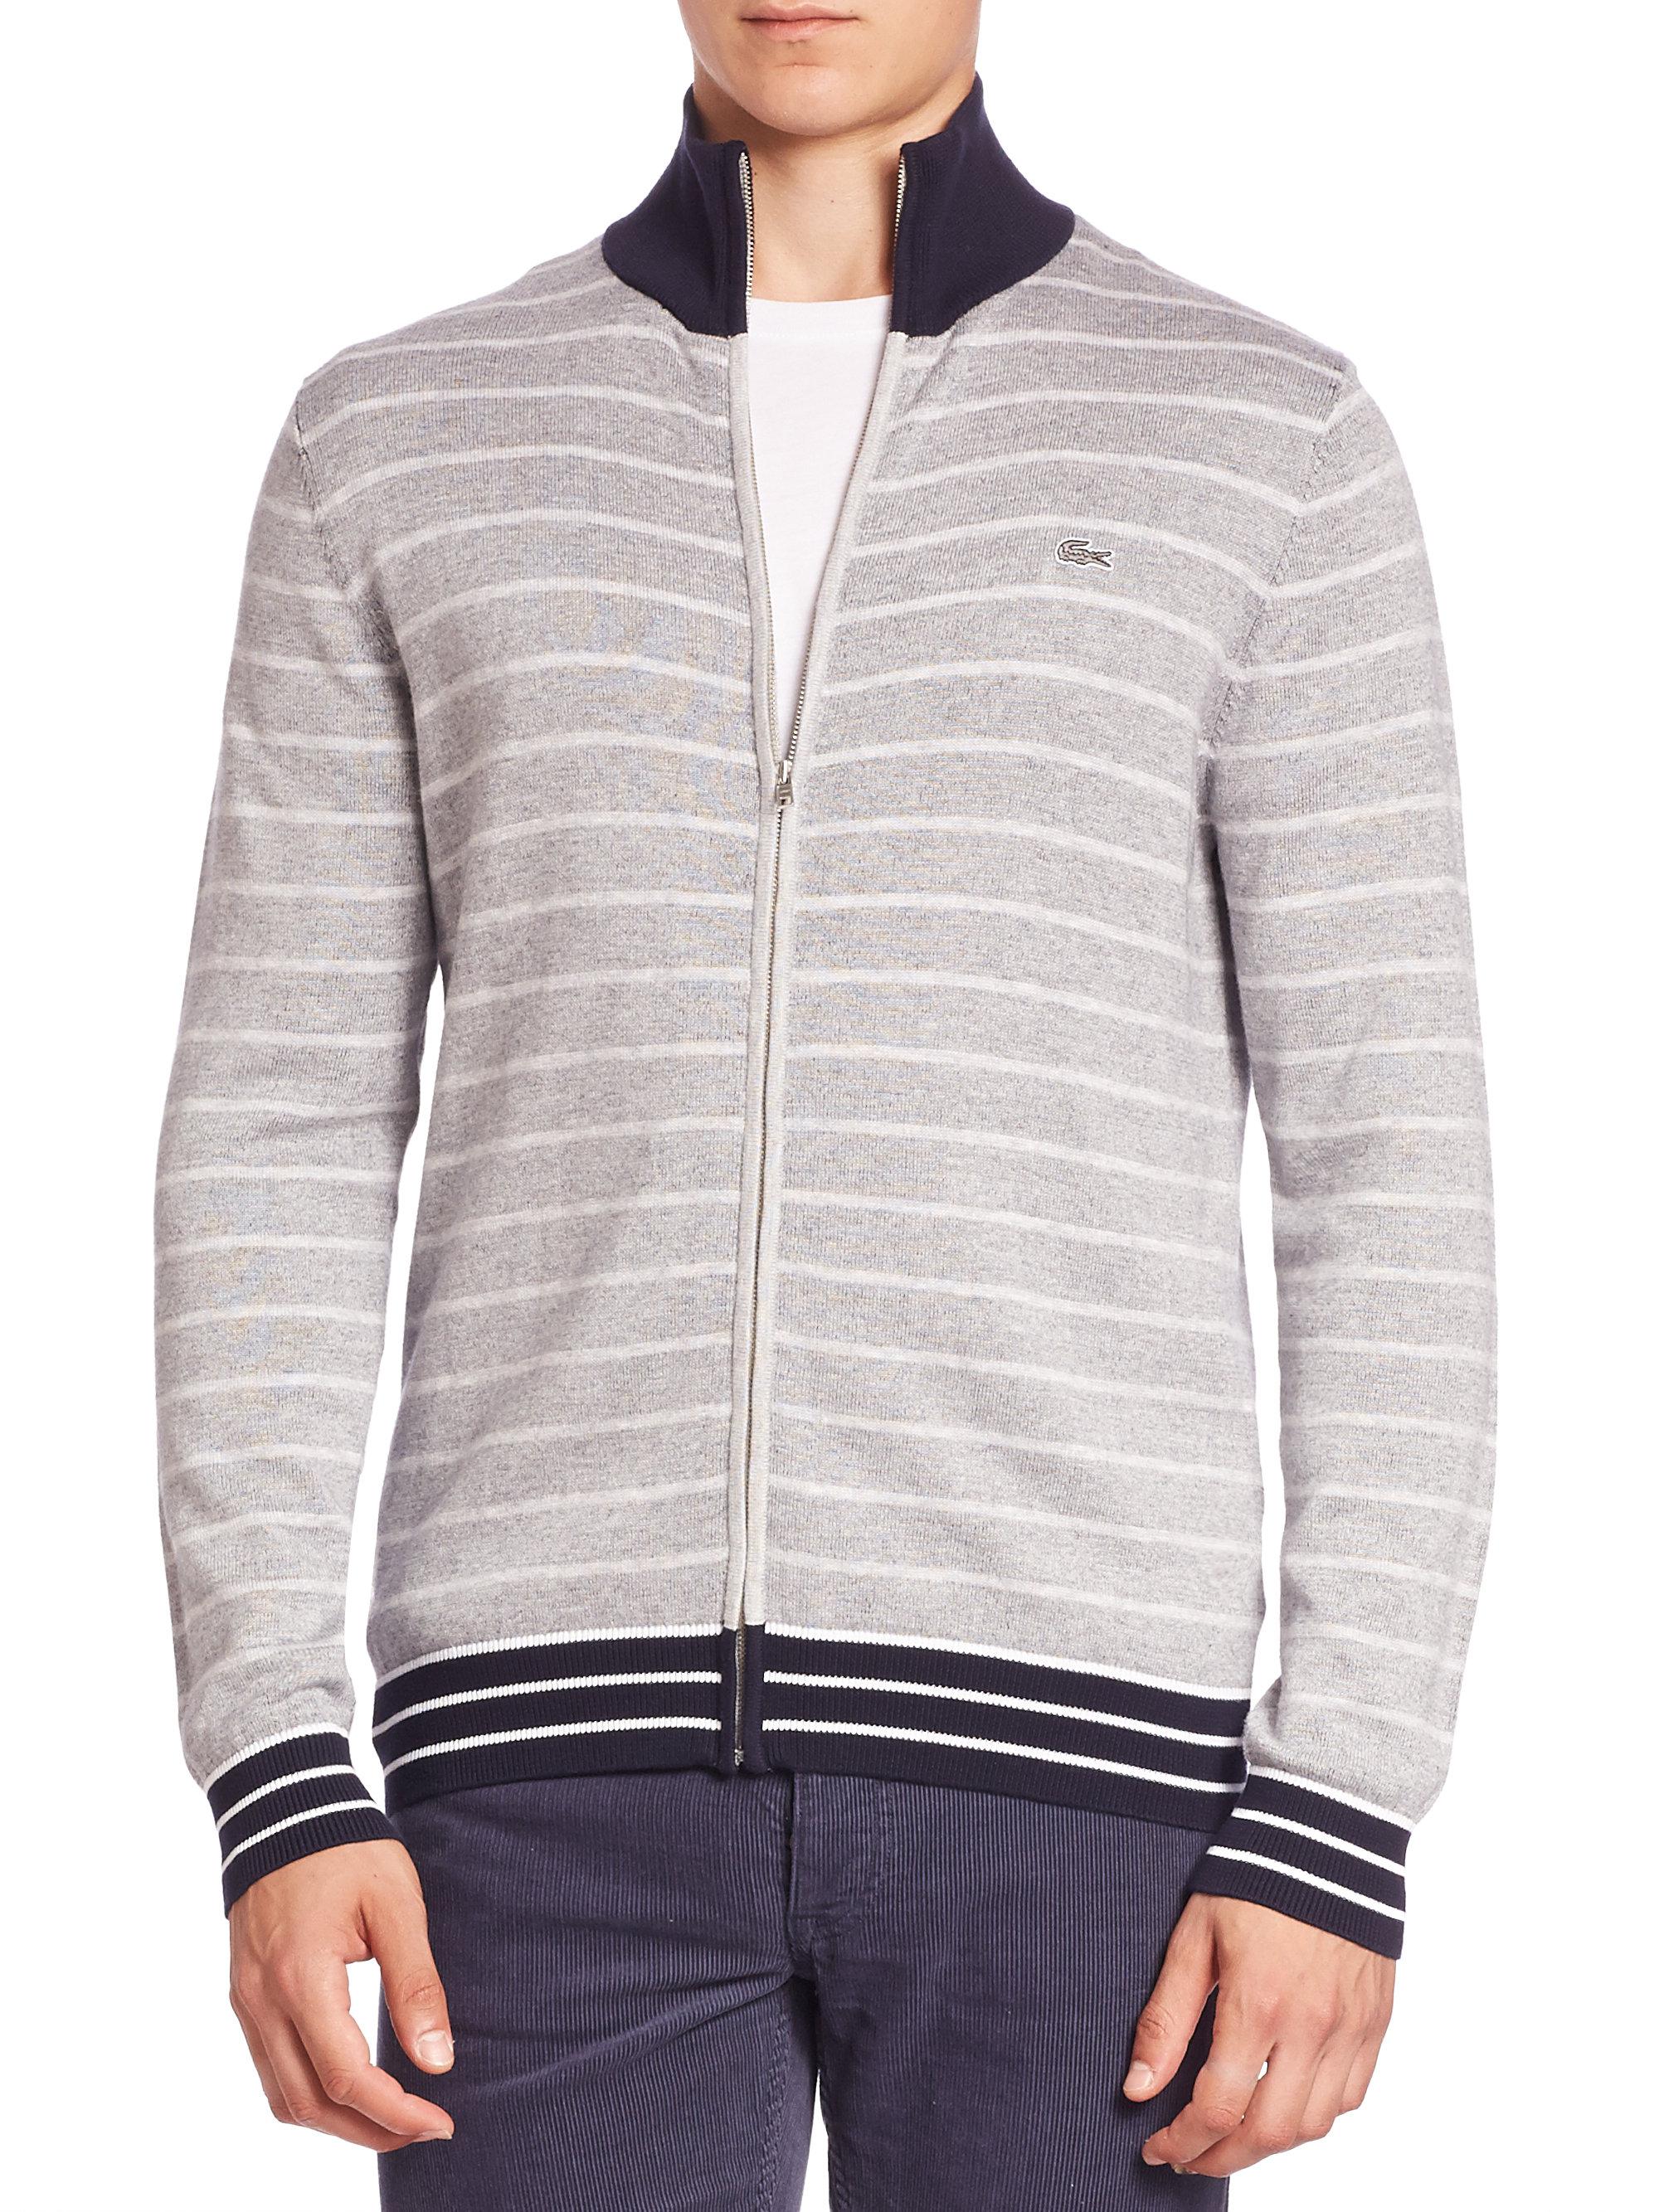 Lacoste Double-face Chine Striped Zip-front Cardigan in Gray for Men - Lyst